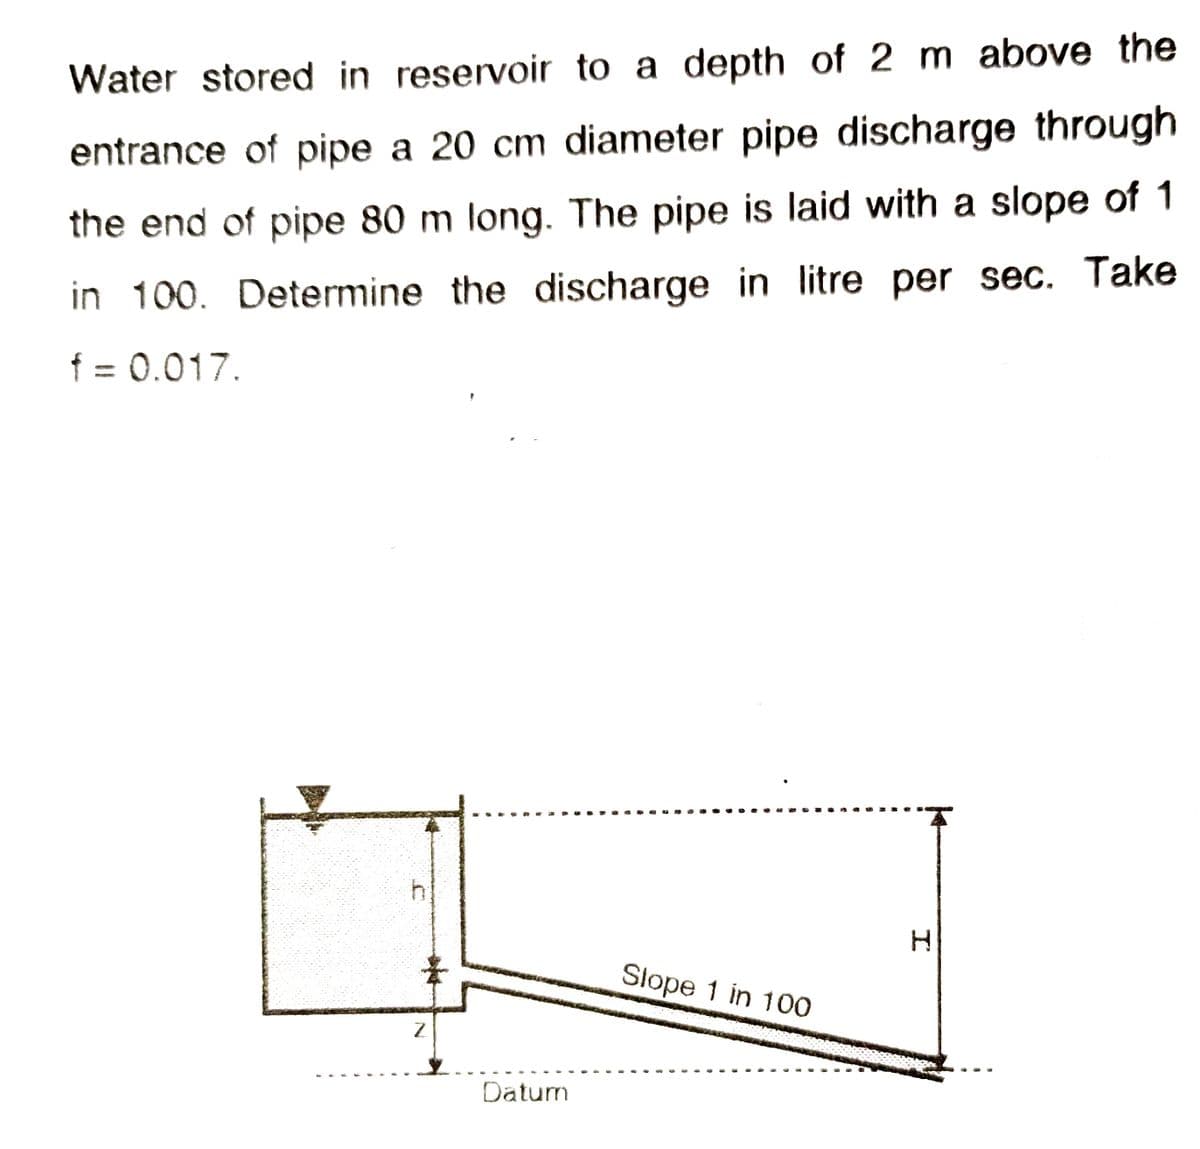 Water stored in reservoir to a depth of 2 m above the
entrance of pipe a 20 cm diameter pipe discharge through
the end of pipe 80 m long. The pipe is laid with a slope of 1
in 100. Determine the discharge in litre per sec. Take
f = 0.017.
Slope 1 in 100
Datum
